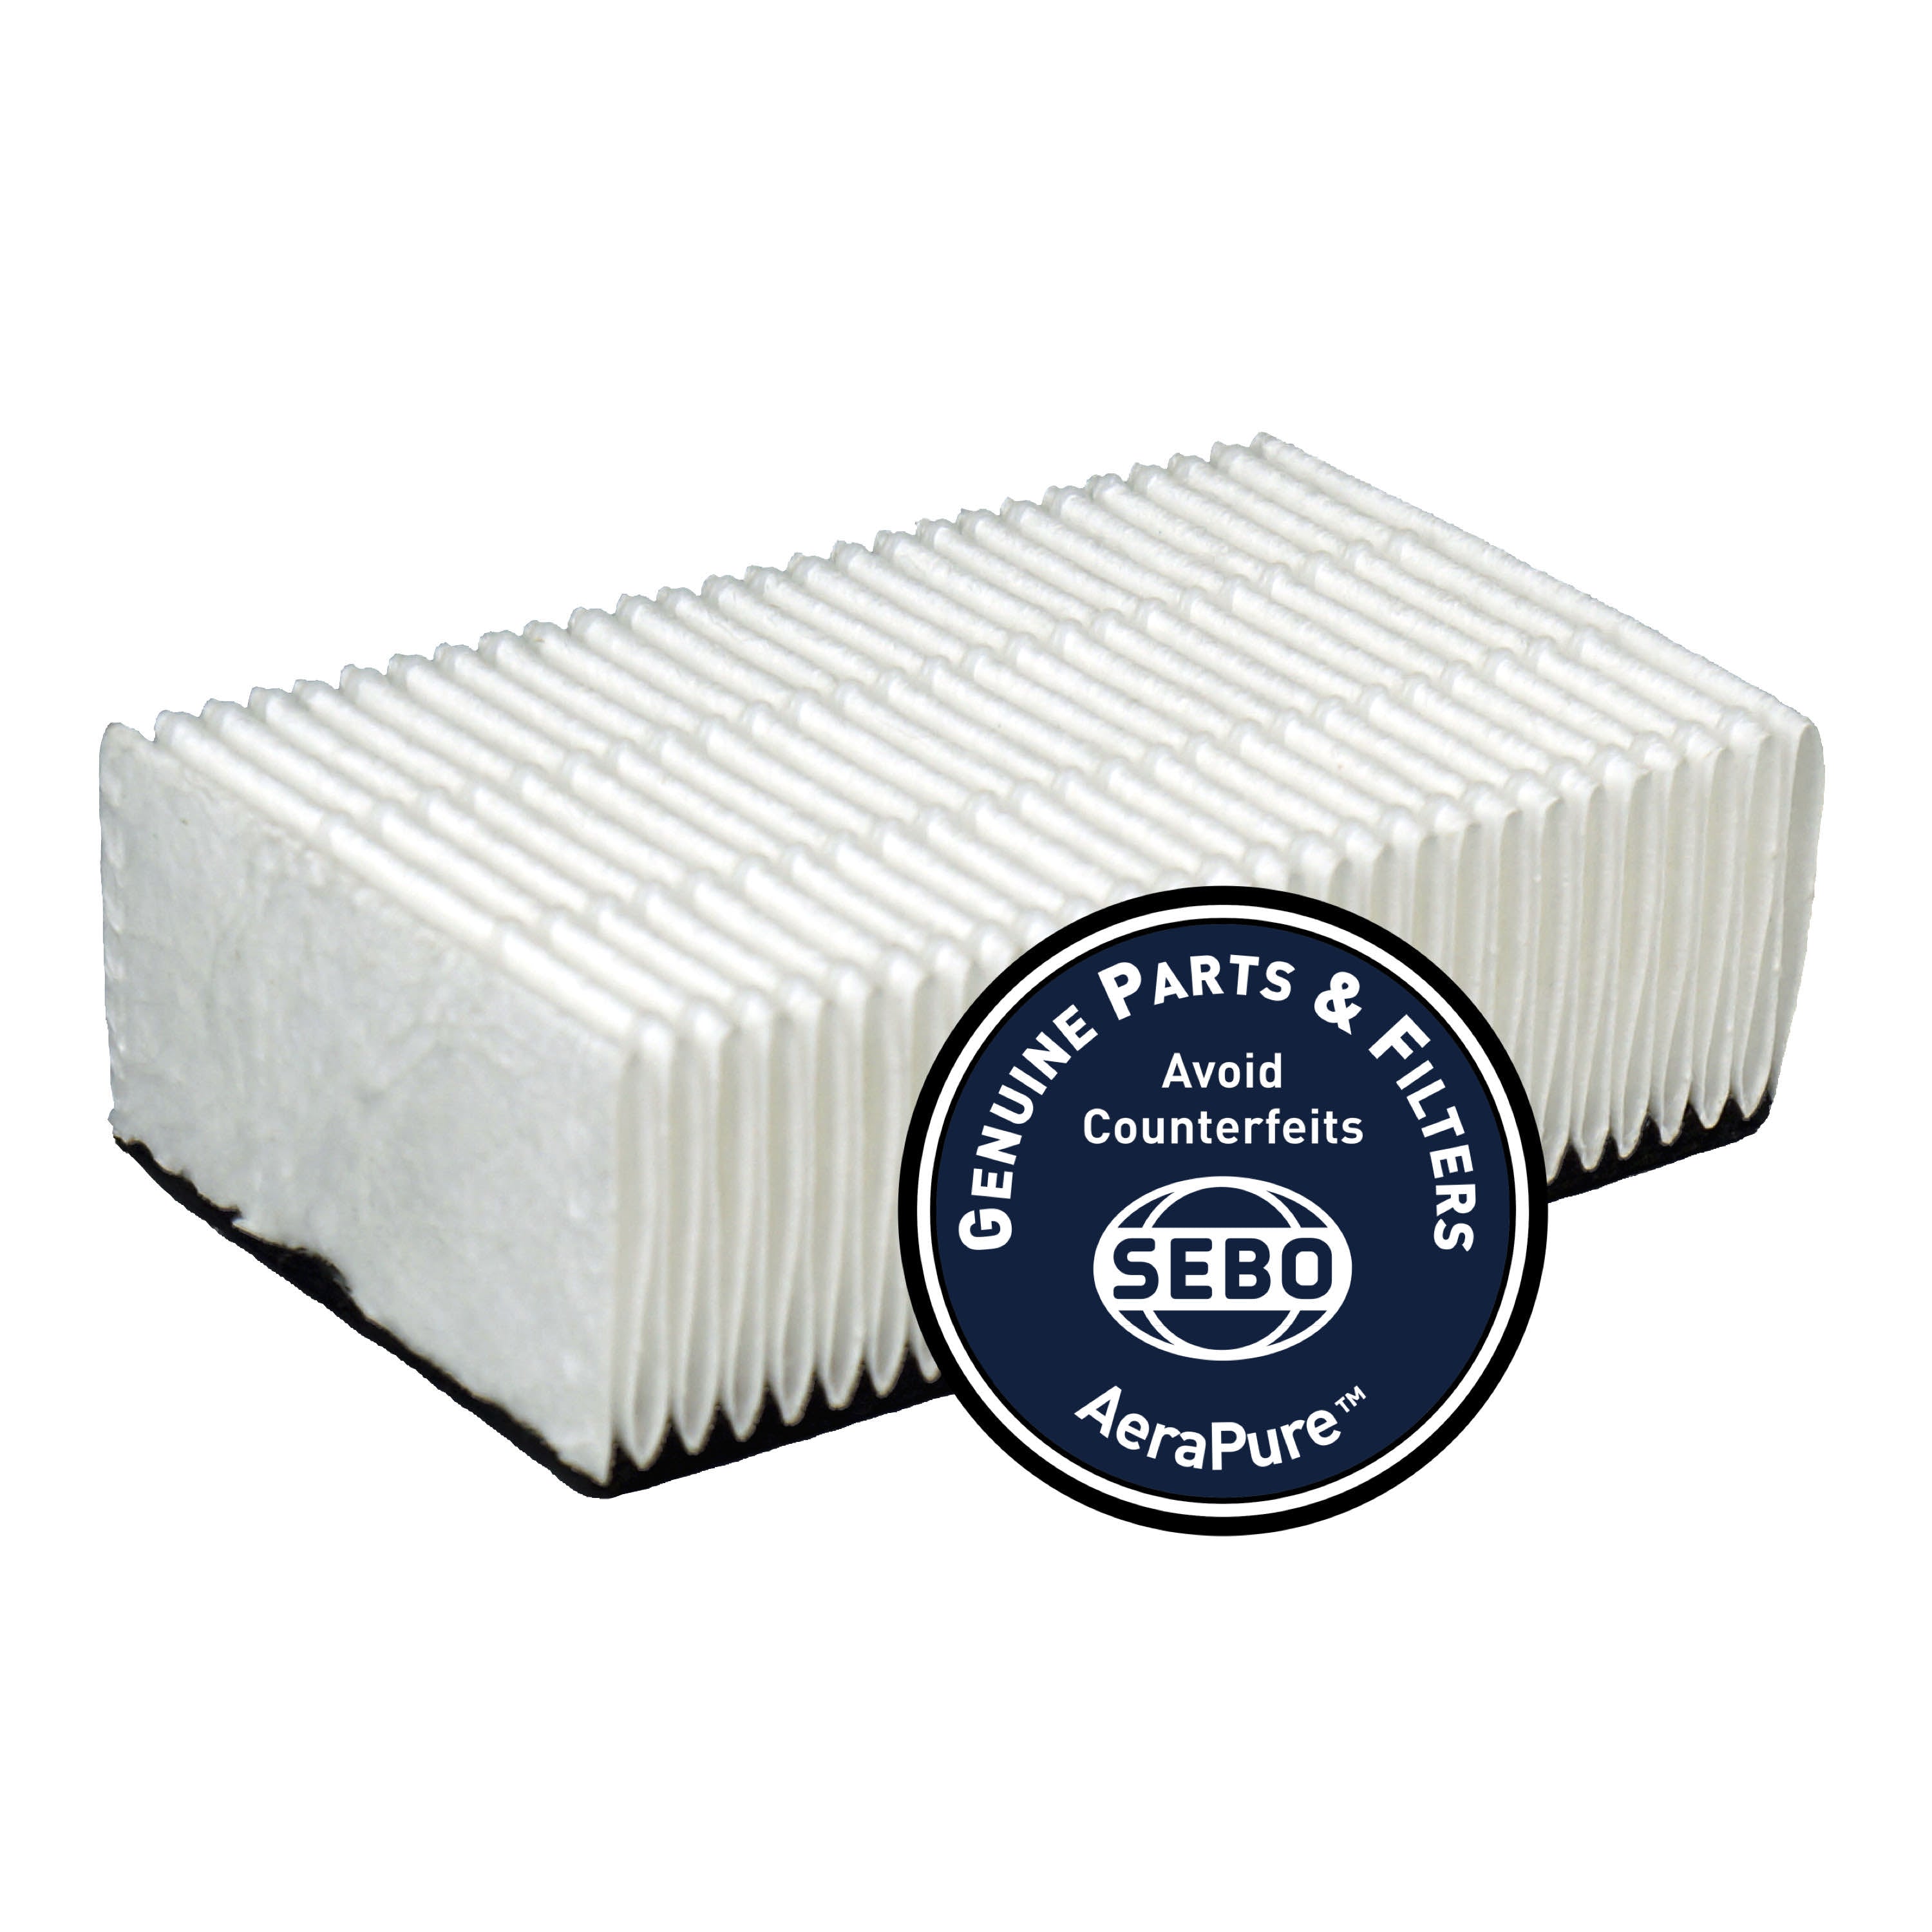 SEBO Exhaust Filter - S Class (insert), for 300 and 350 MECHANICAL